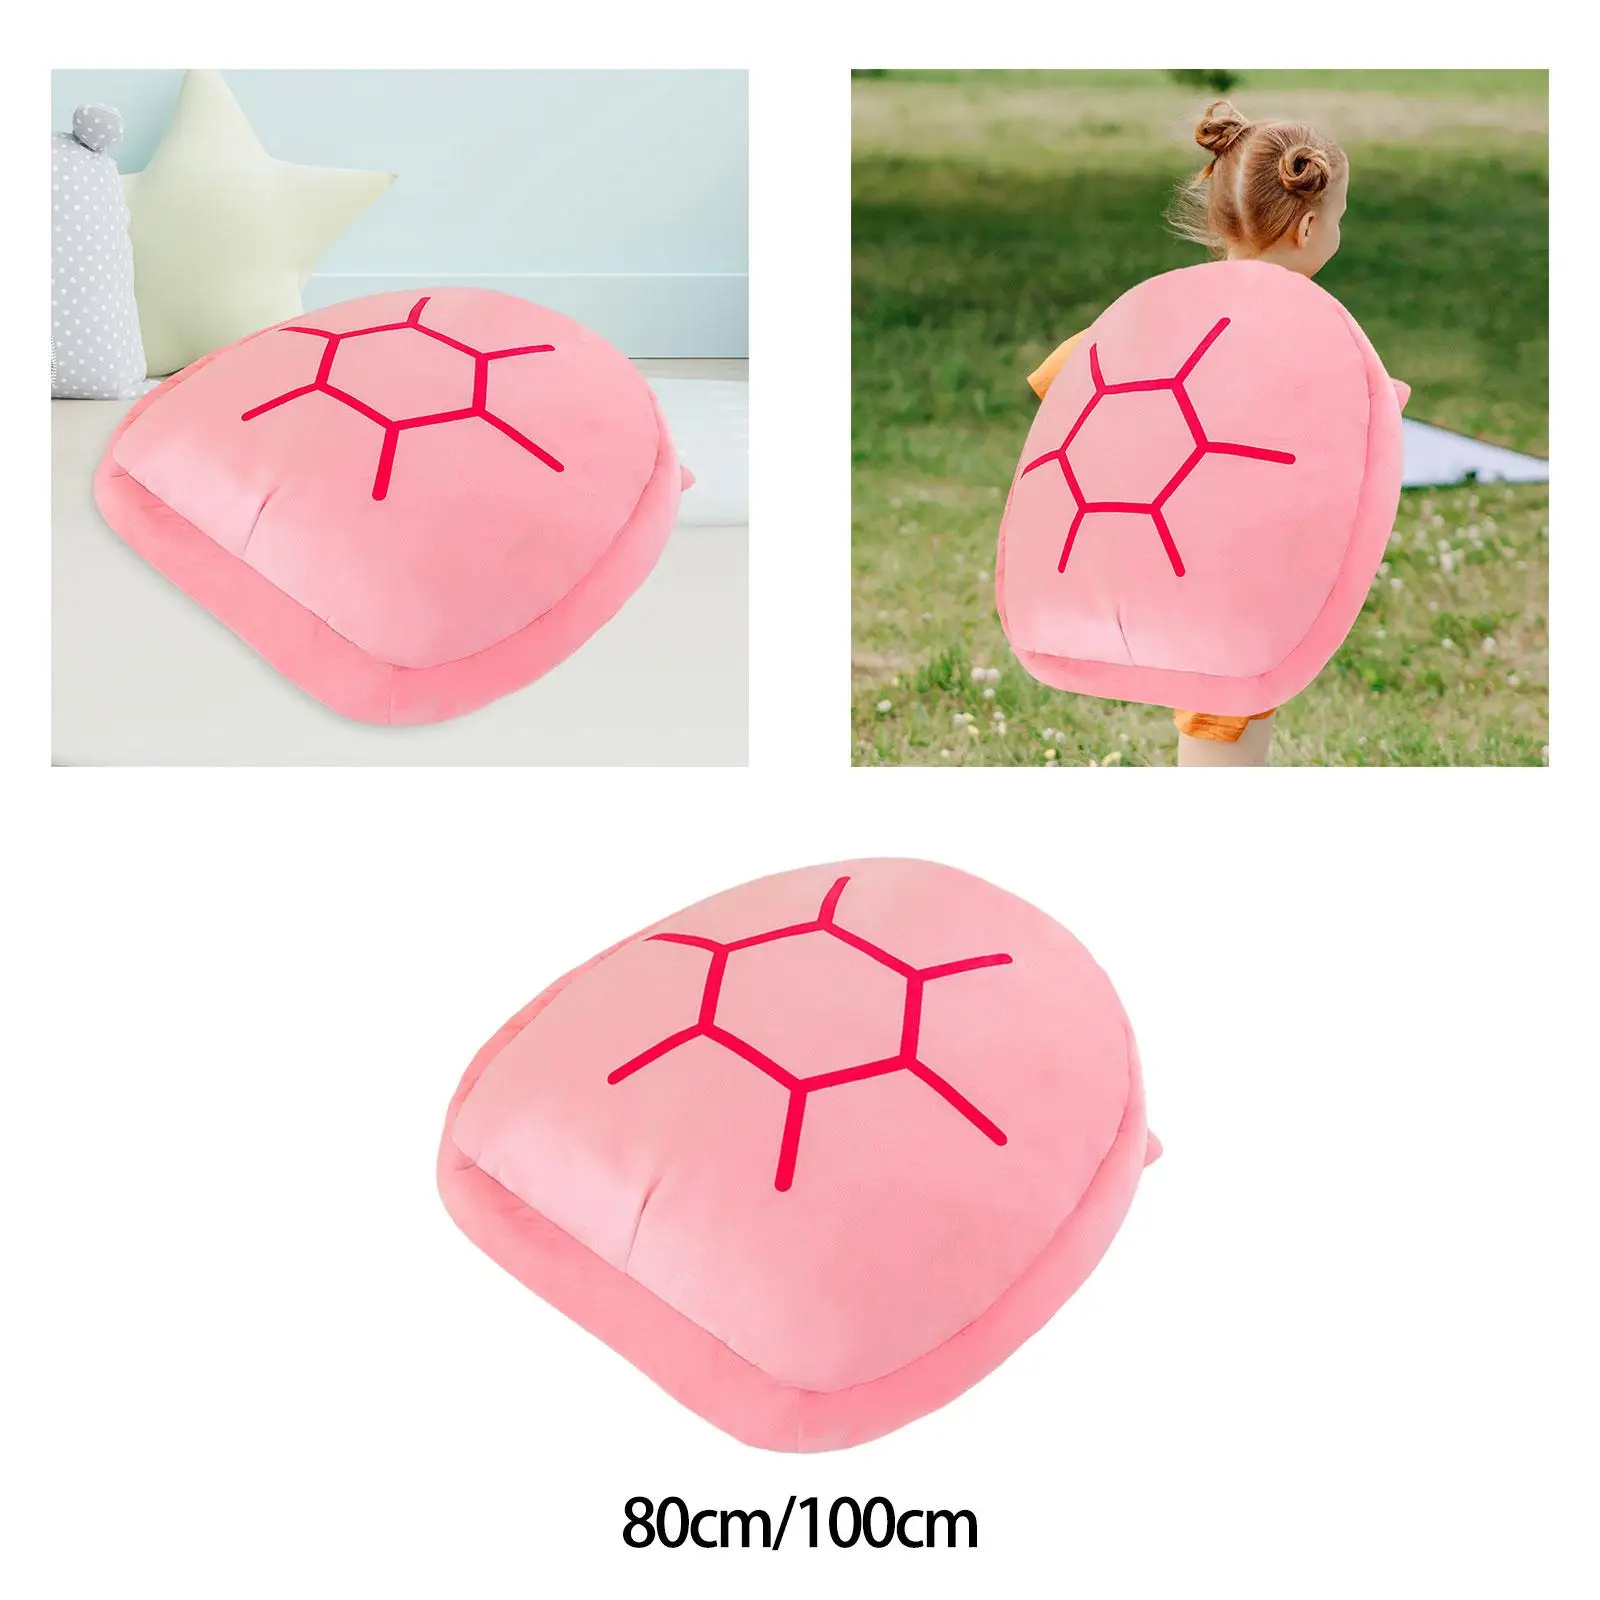 Wearable Turtle Shell Pillow Tortoise Clothes Stuffed Toy for Game